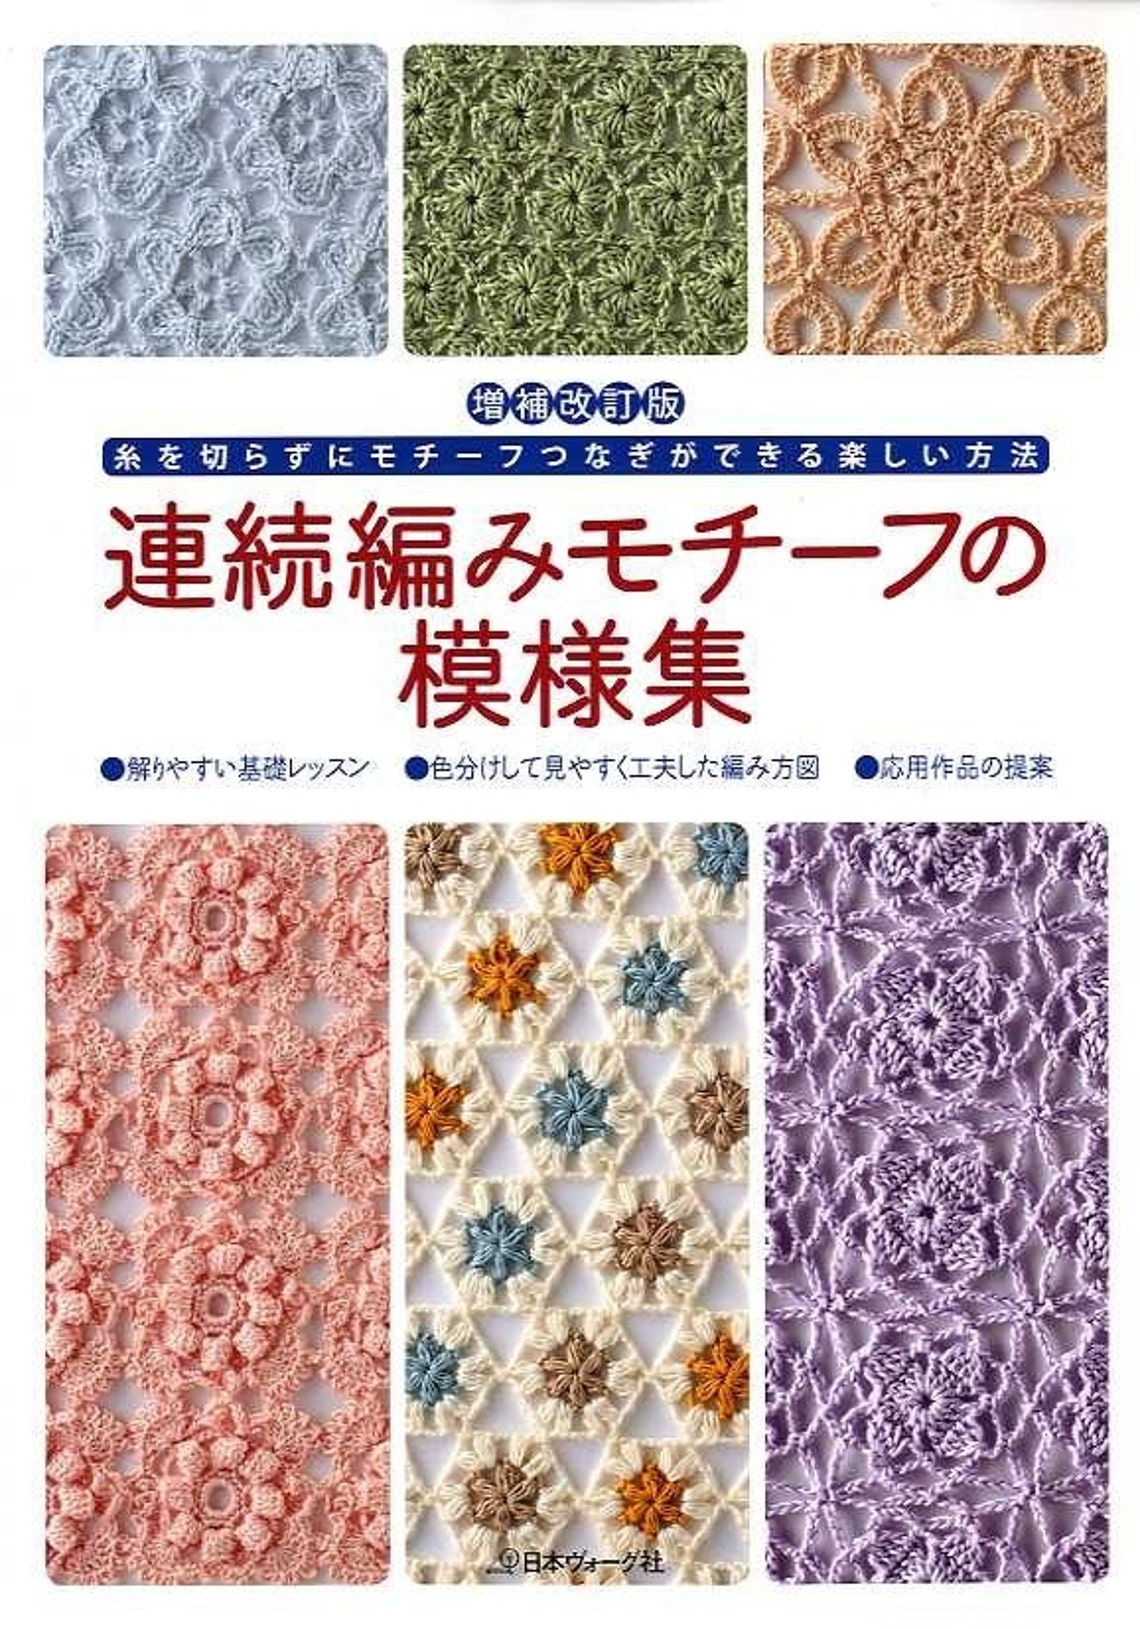 CONTINUOUS CROCHET  MOTIF  60 Book  Japanese Craft Book  Etsy